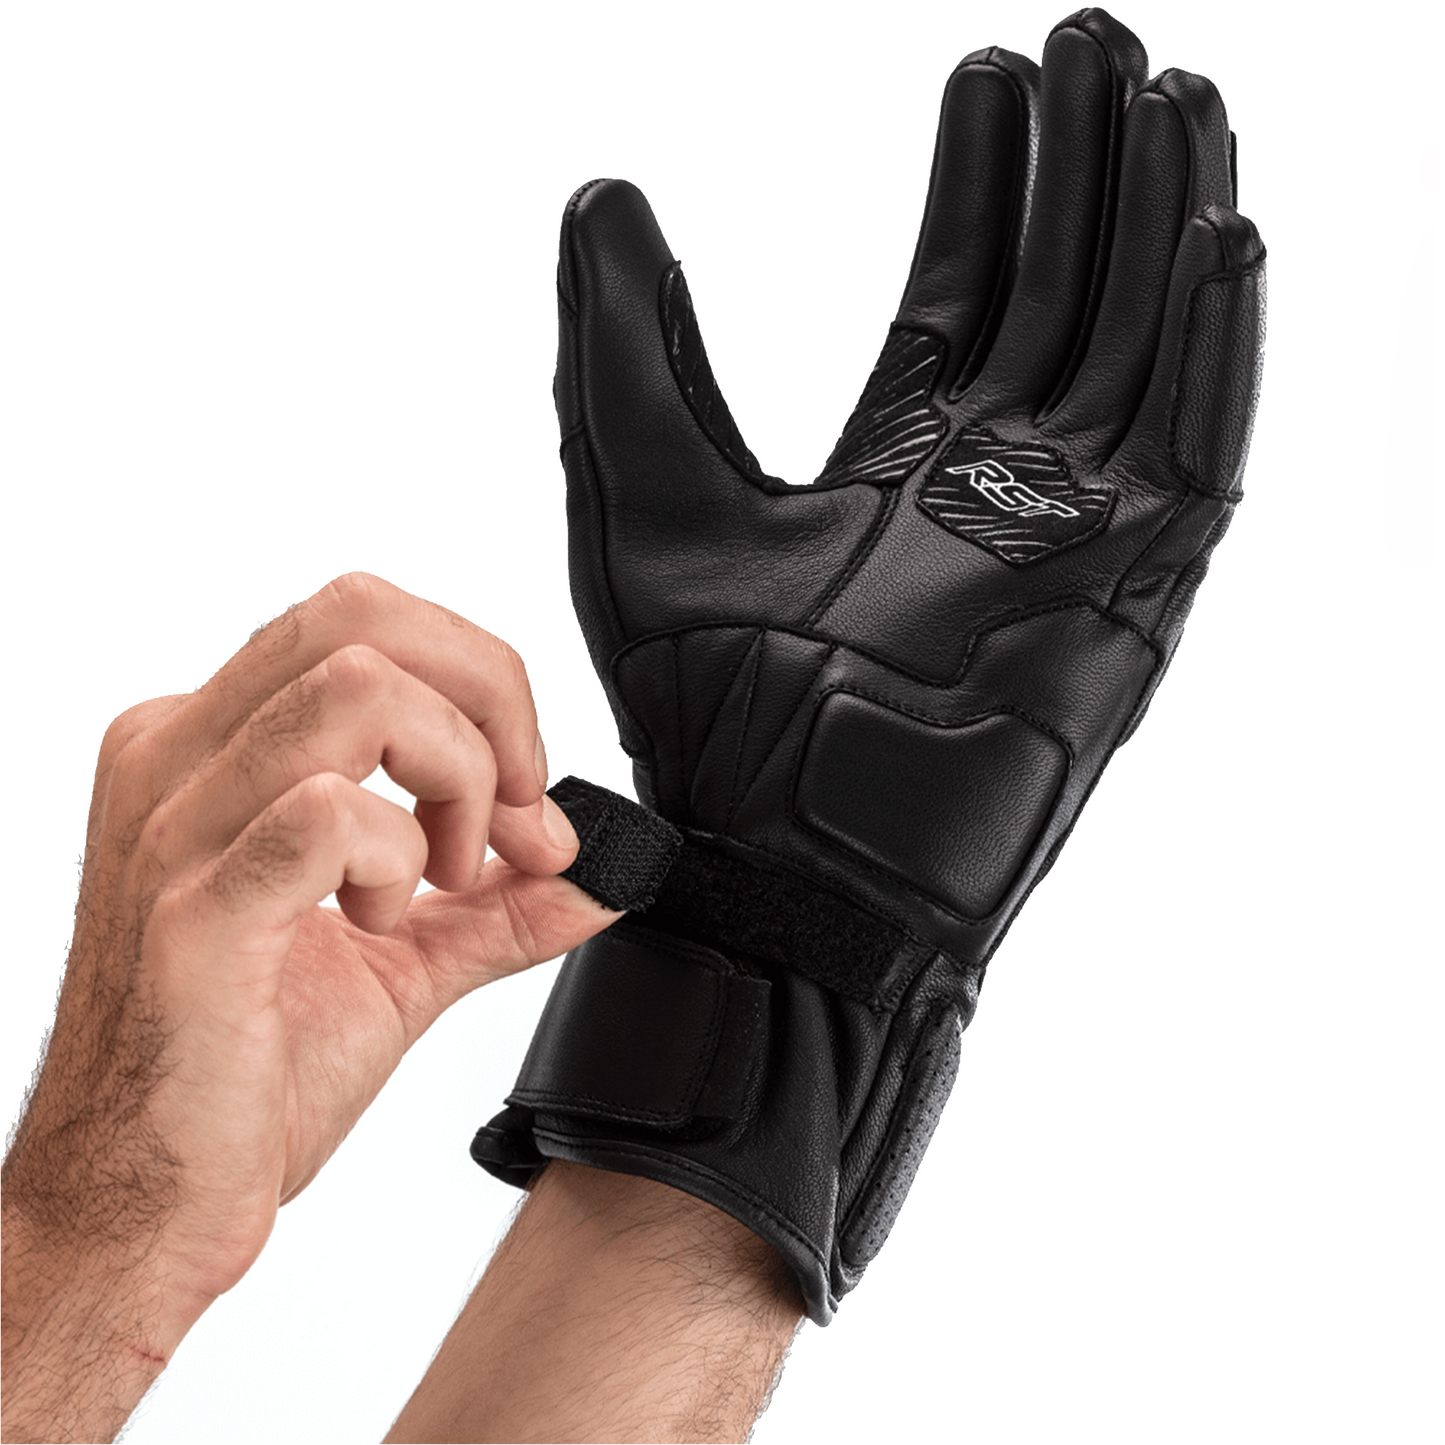 RST Turbine Waterproof Leather Riding Gloves - CE APPROVED - Black